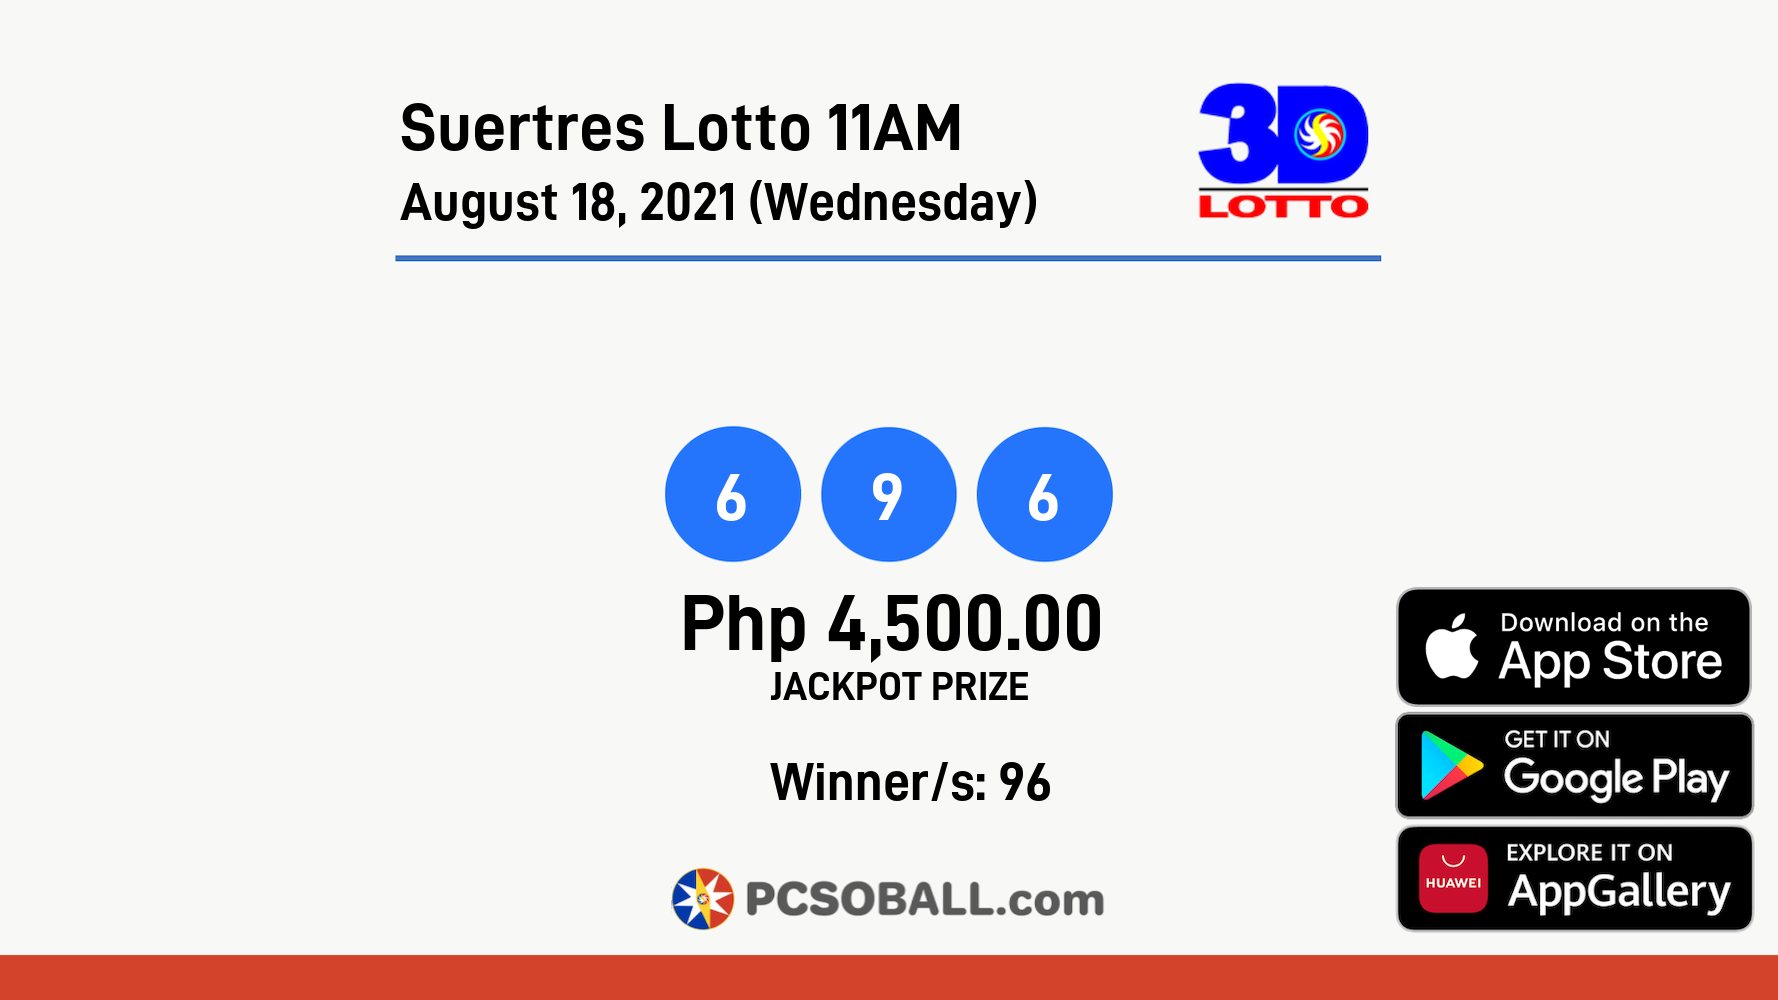 Suertres Lotto 11AM August 18, 2021 (Wednesday) Result